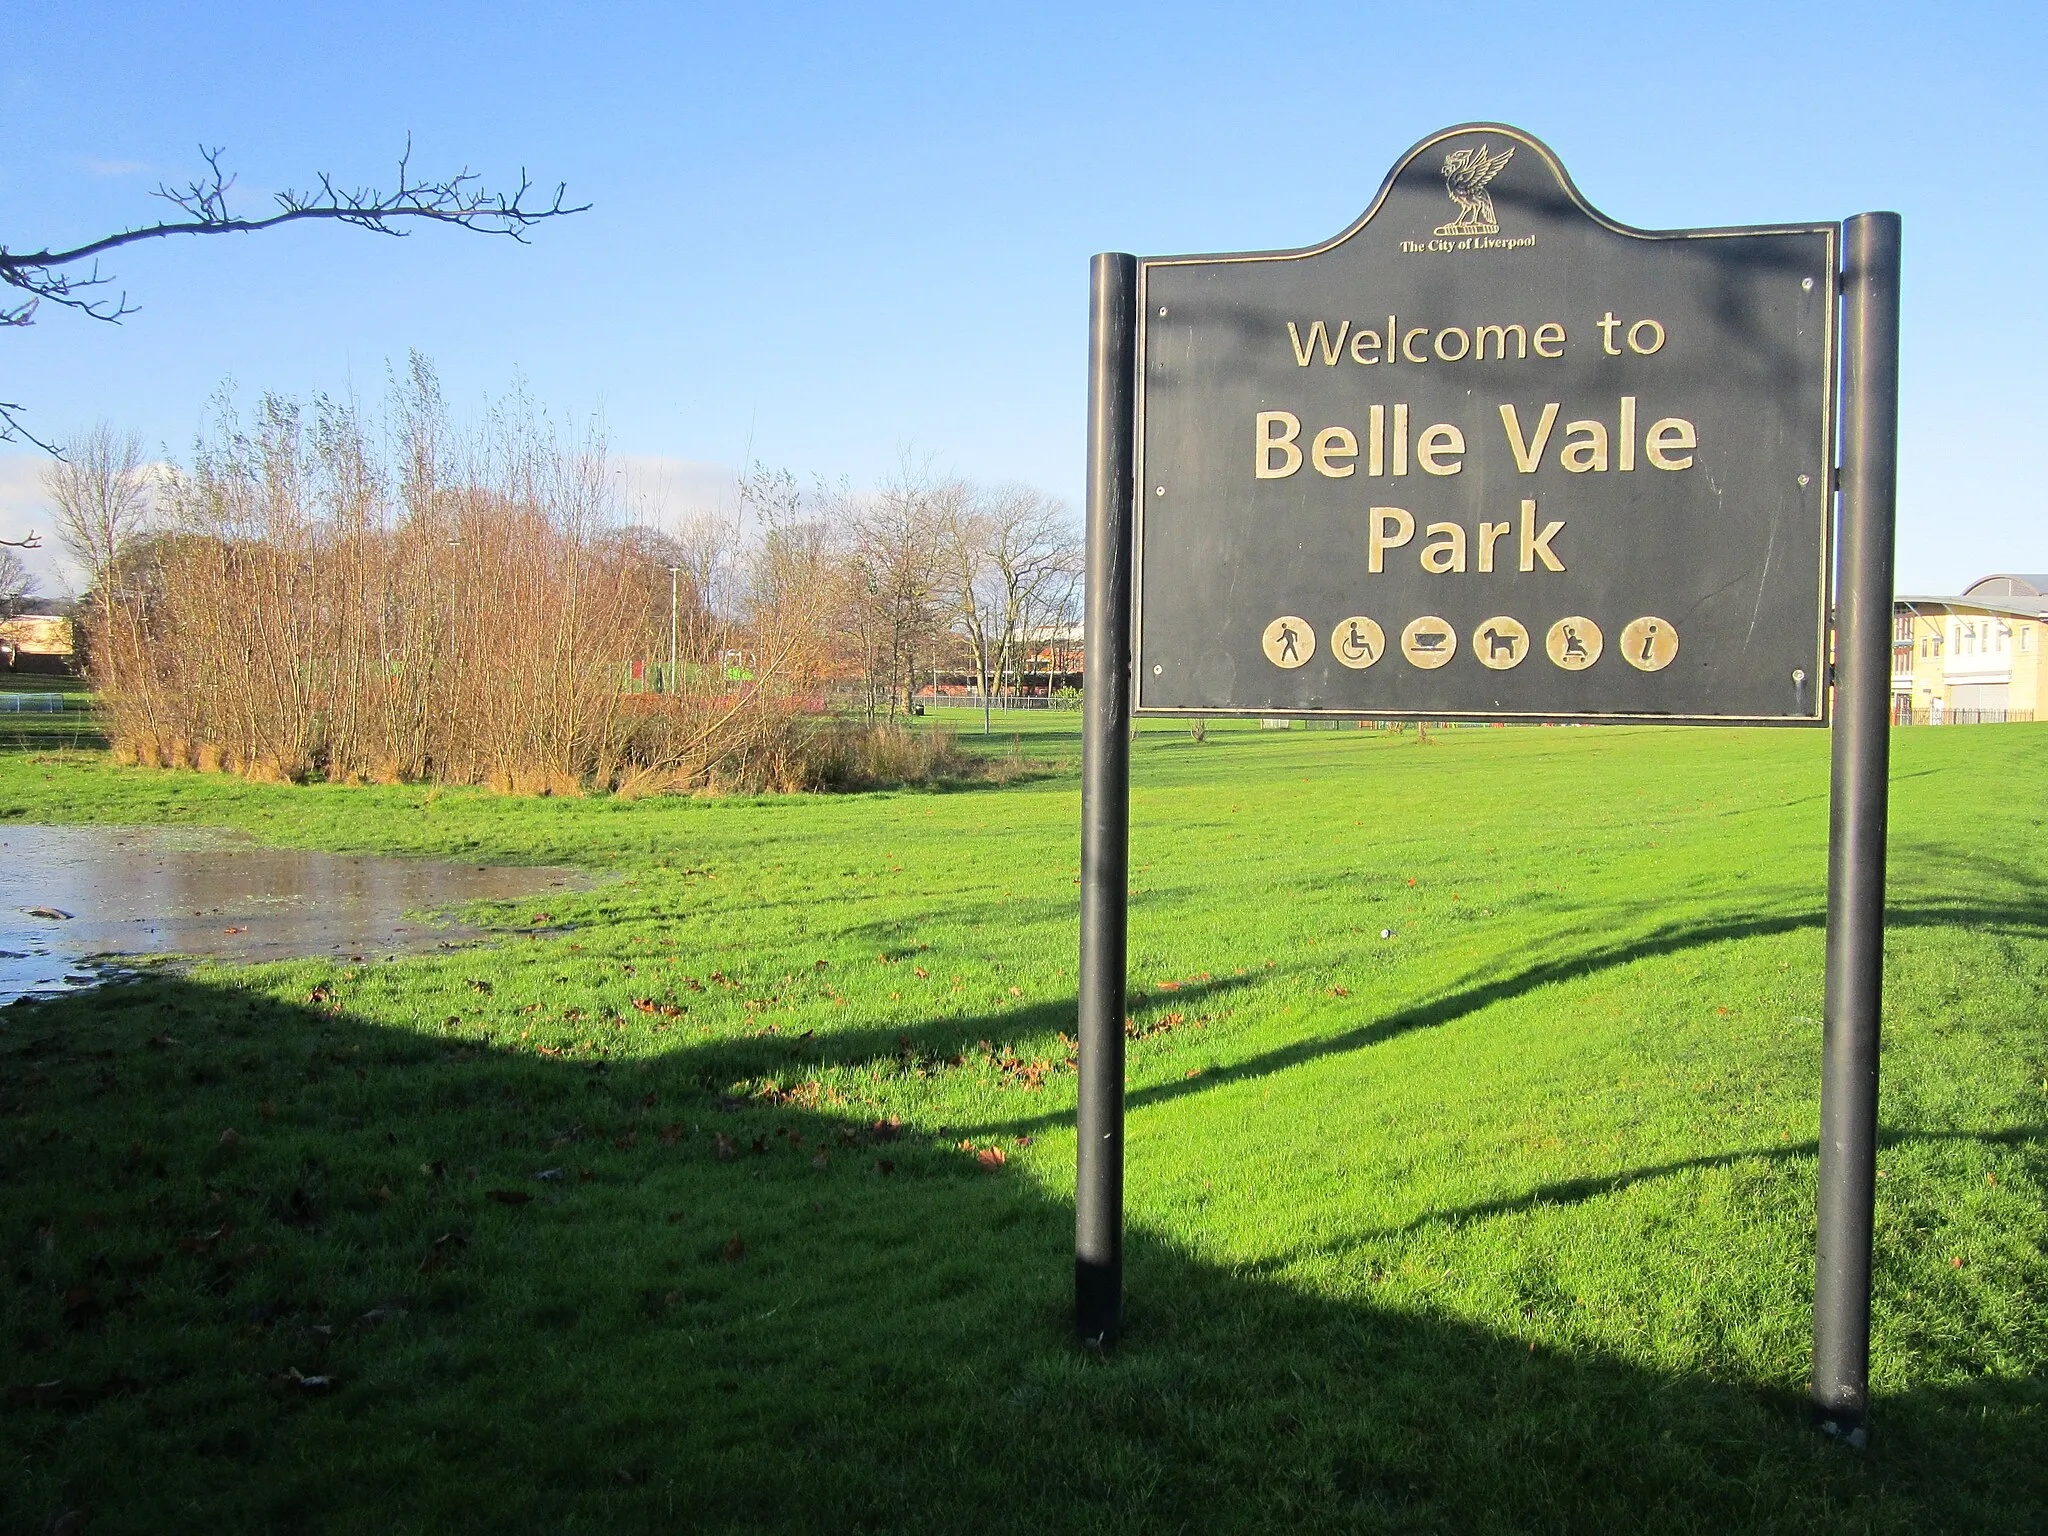 Photo showing: Photo taken at Belle Vale Park, Liverpool, England.